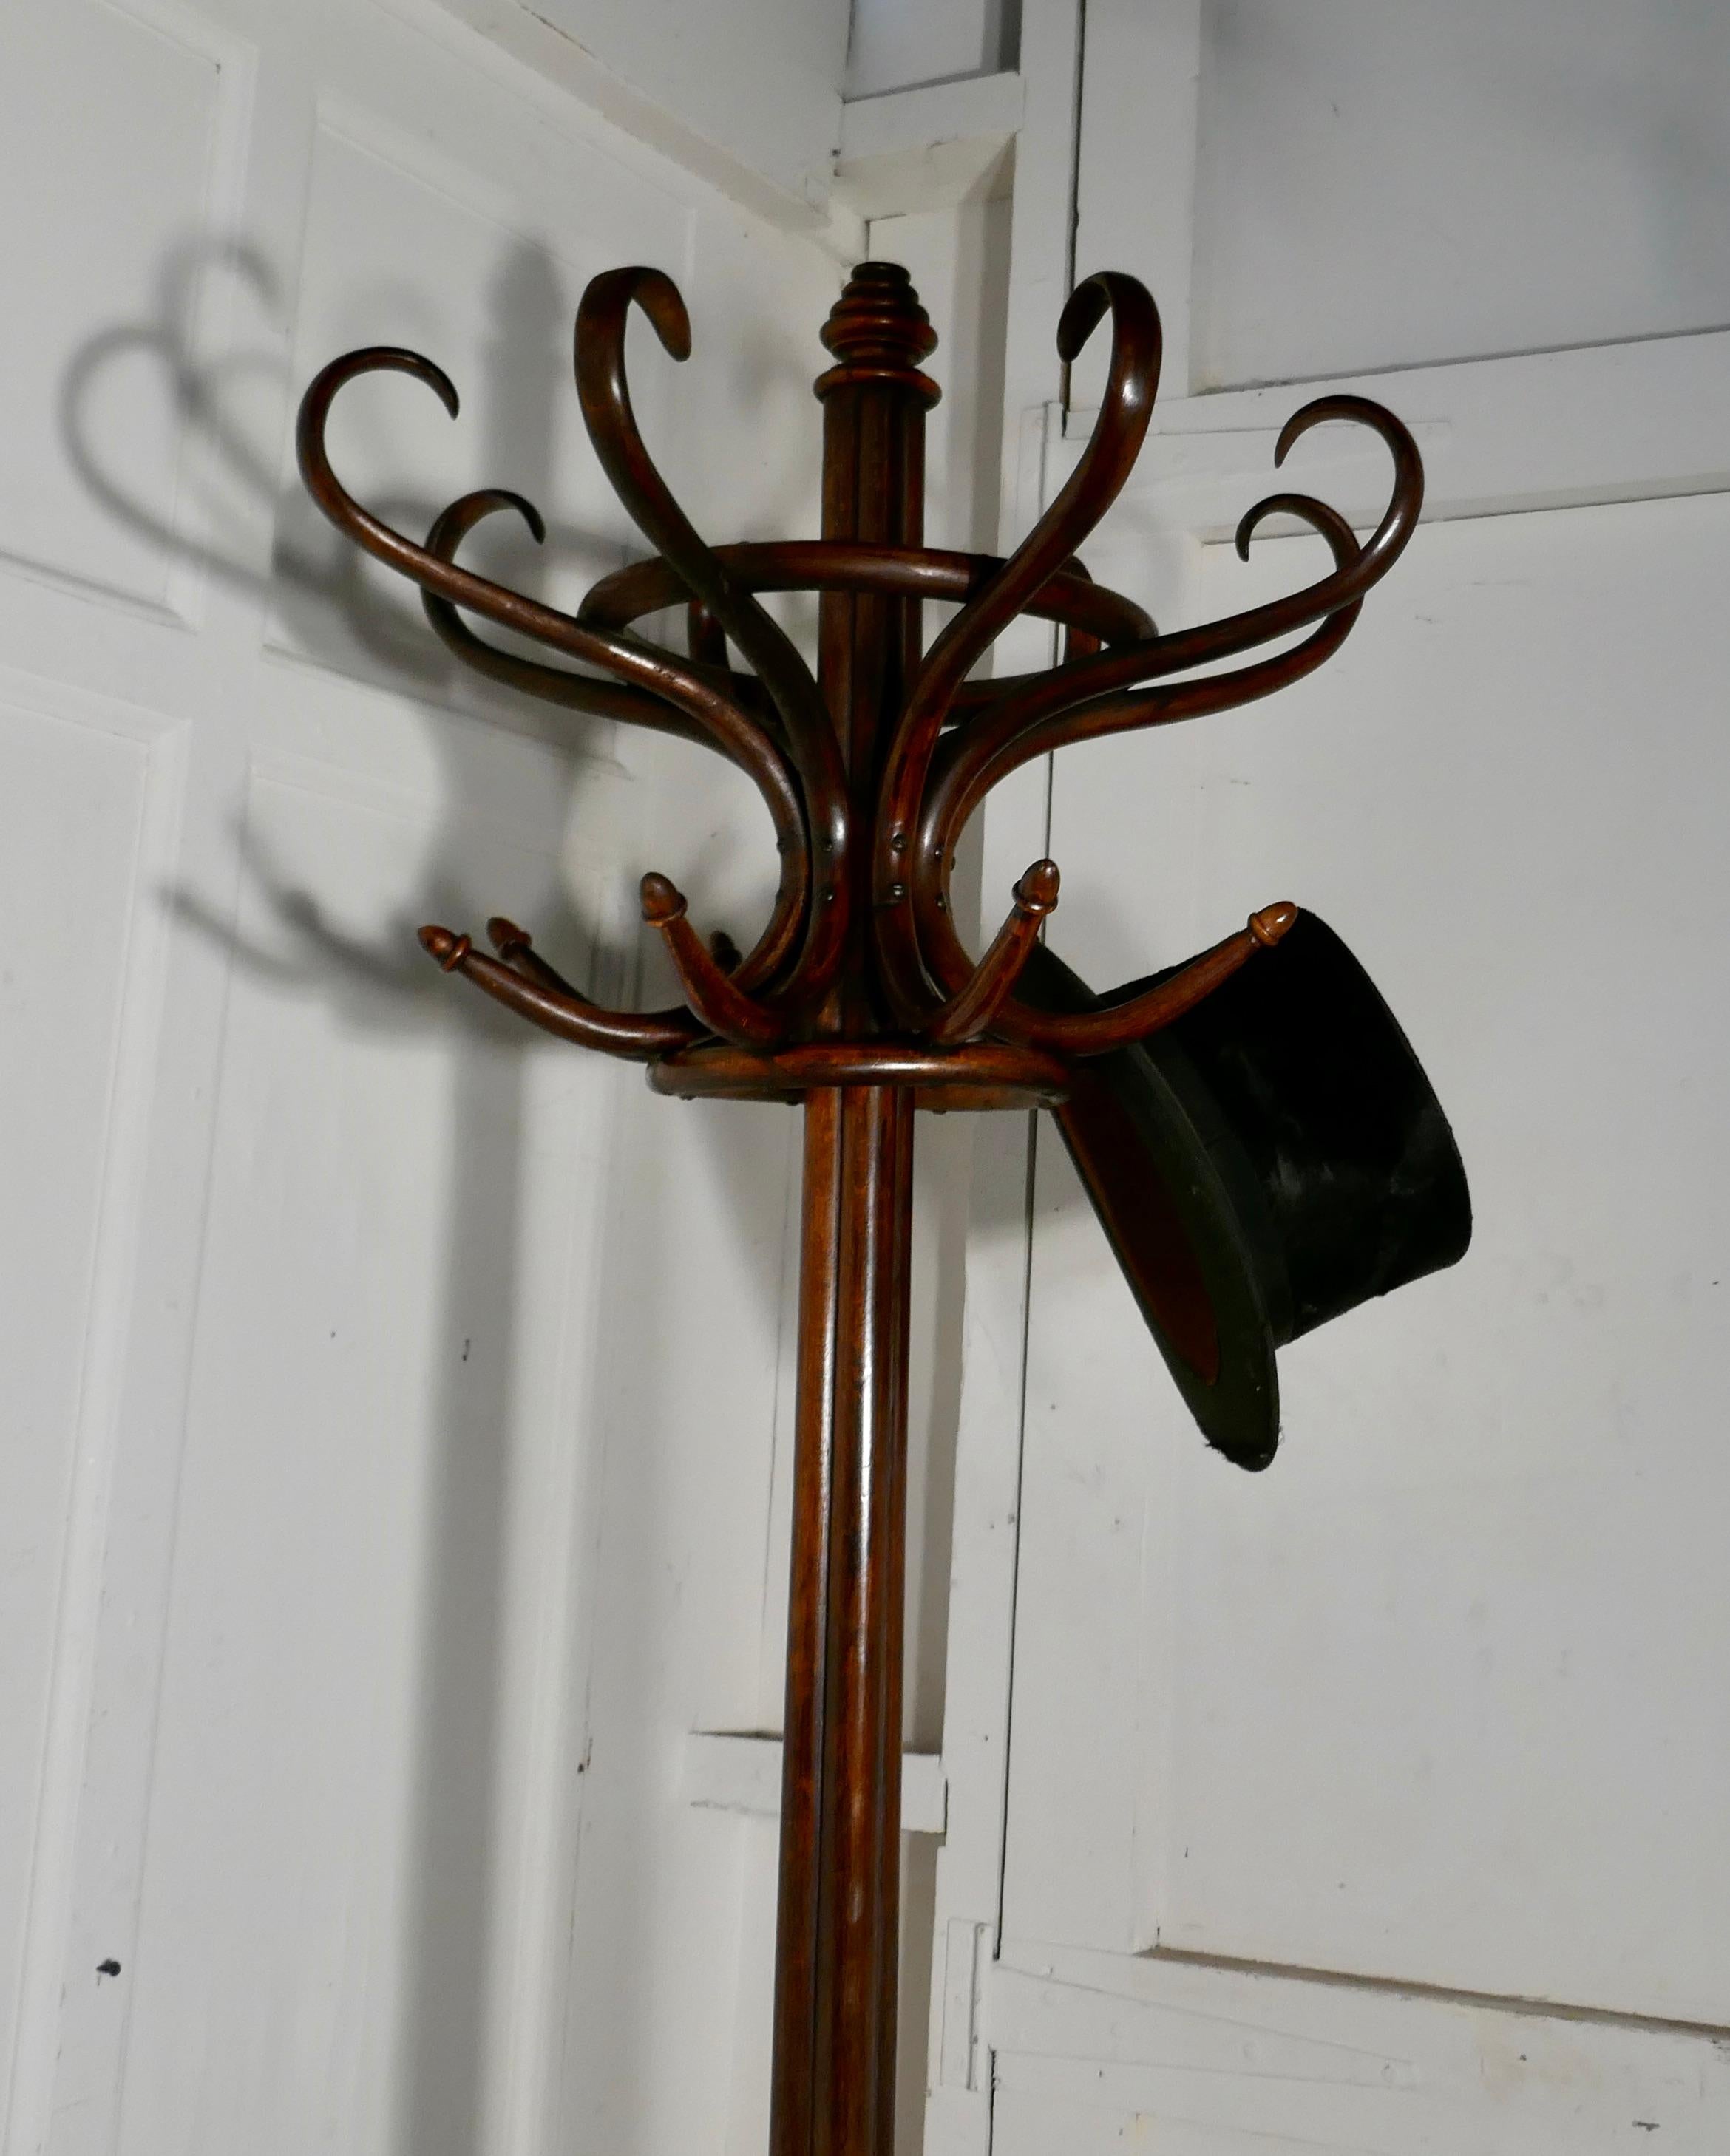 19th century Thonet bentwood hall stand

This is an Unusual large hat and coat hall stand, made by Thonet it has 8 large curved bentwood hat hangers and 8 coat hooks at the top and 4 large scrolling Legs forming the umbrella receptacle at the